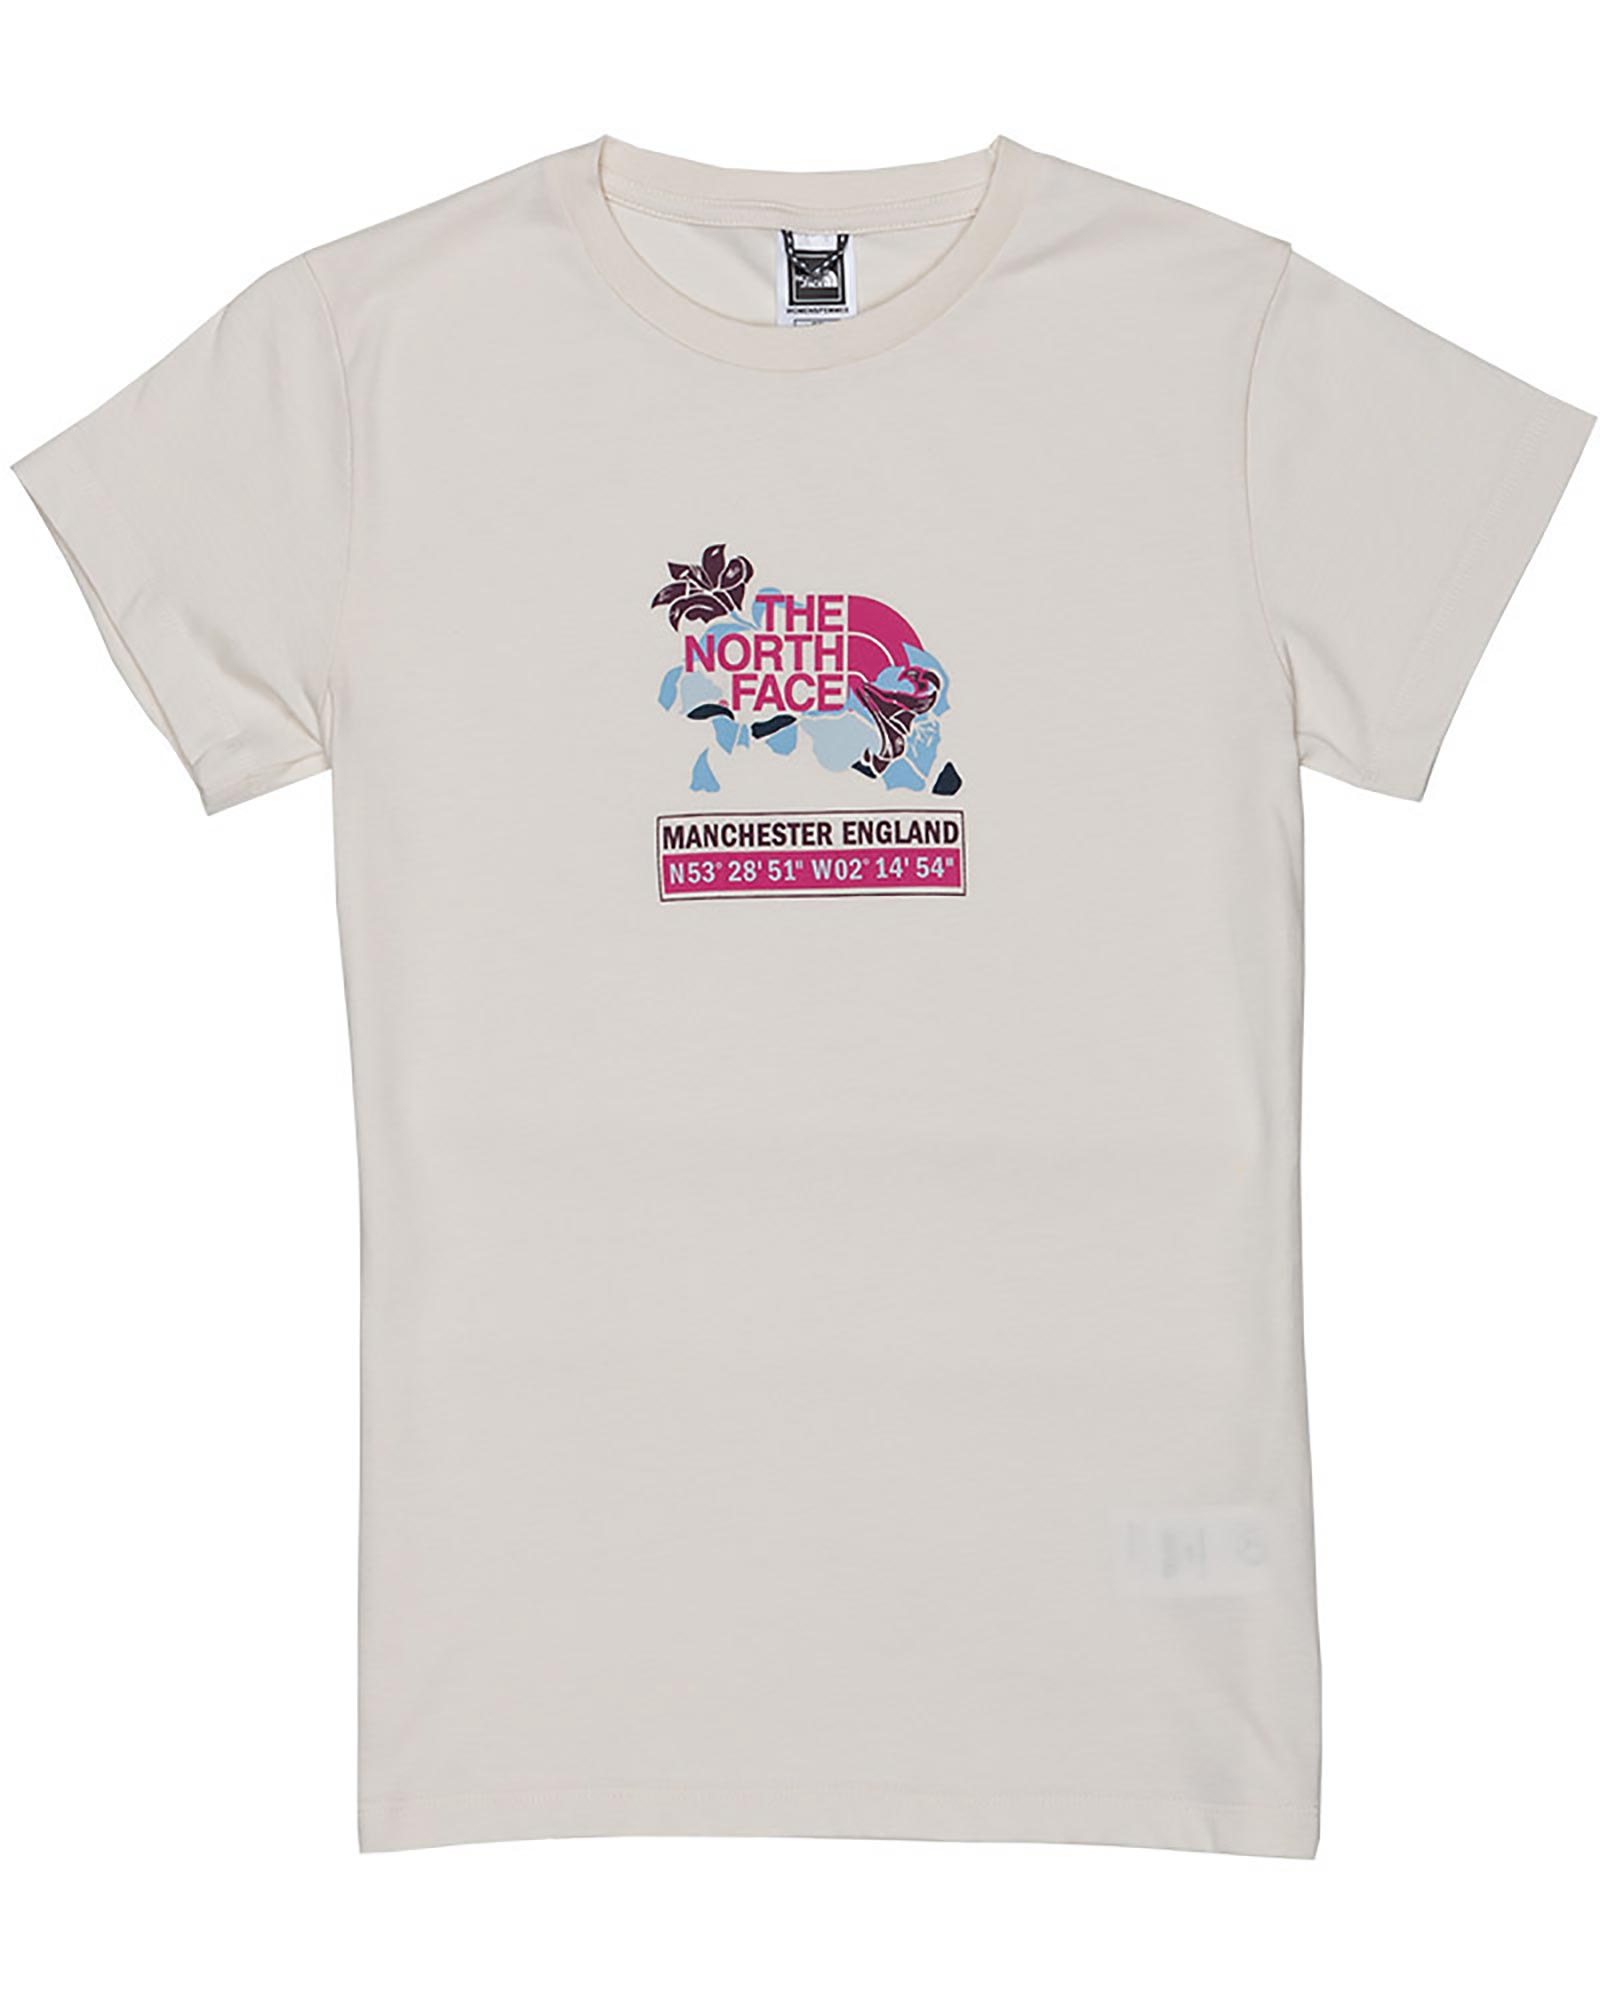 The North Face Manchester Gps Logo Womens T-shirt